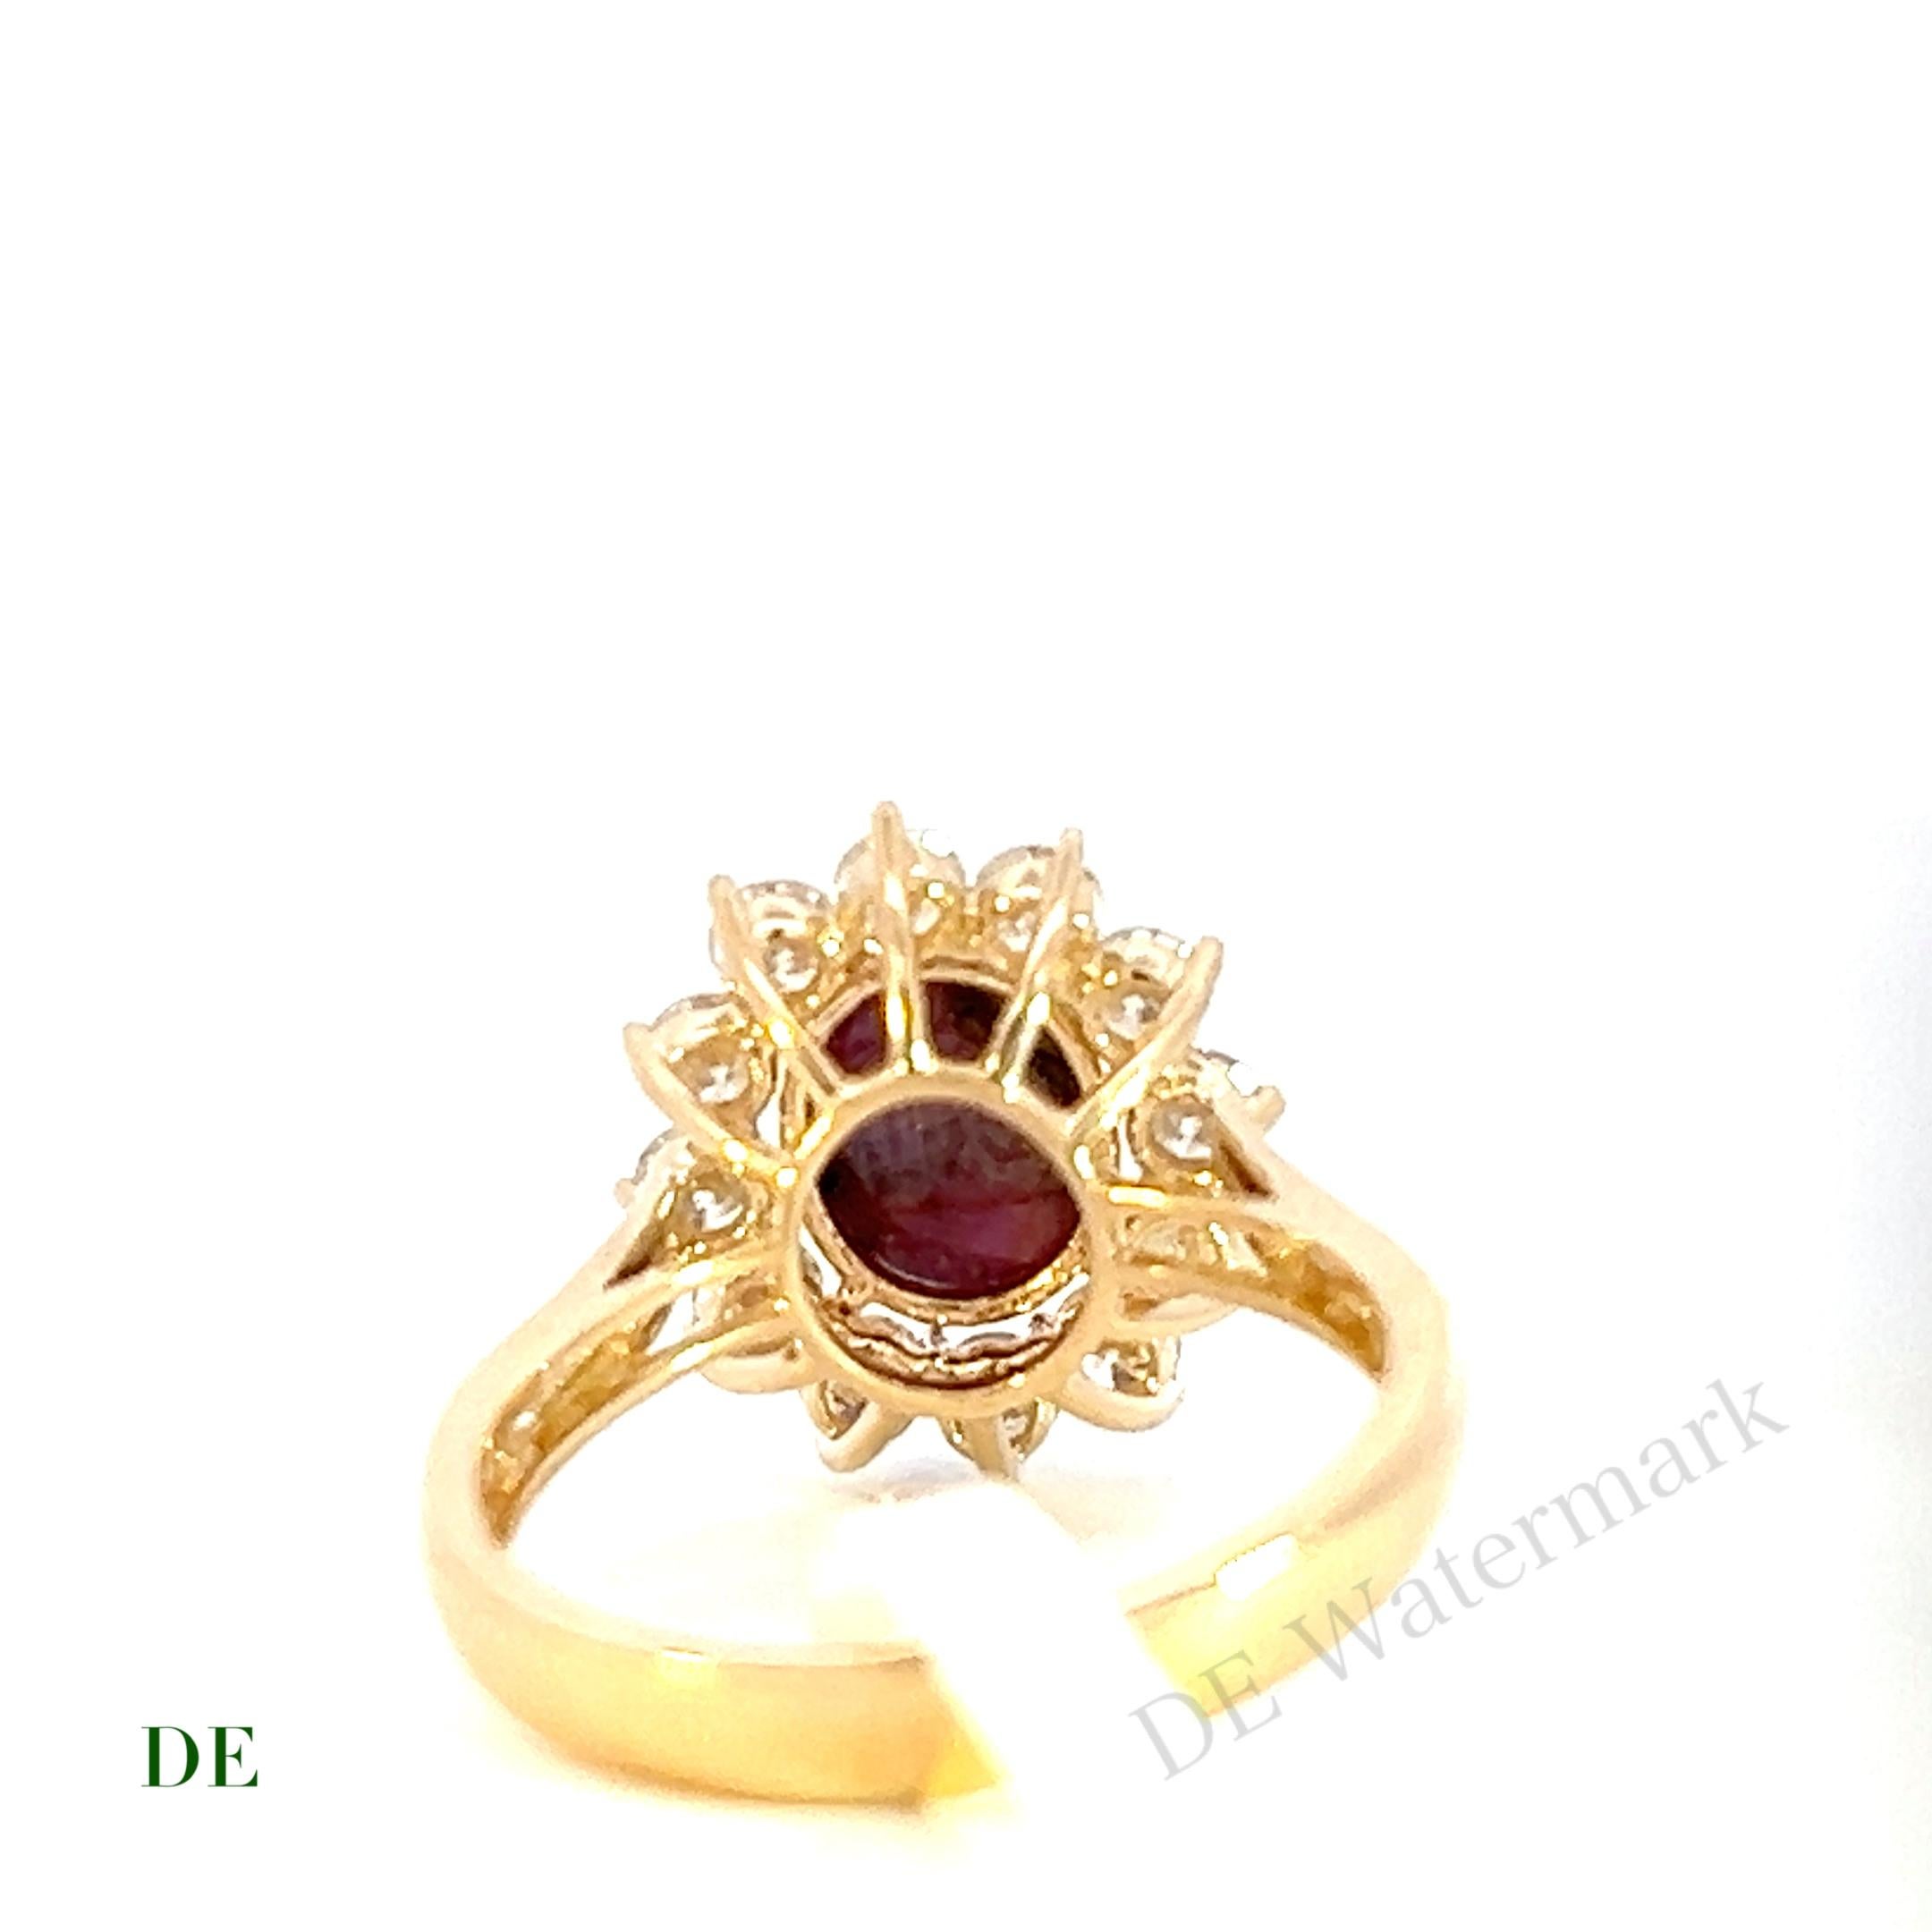 Cabochon Rare Exclusive 14k Yellow 3.2 crt Red Ruby Star Sapphire 1.23 crt Diamond ring For Sale